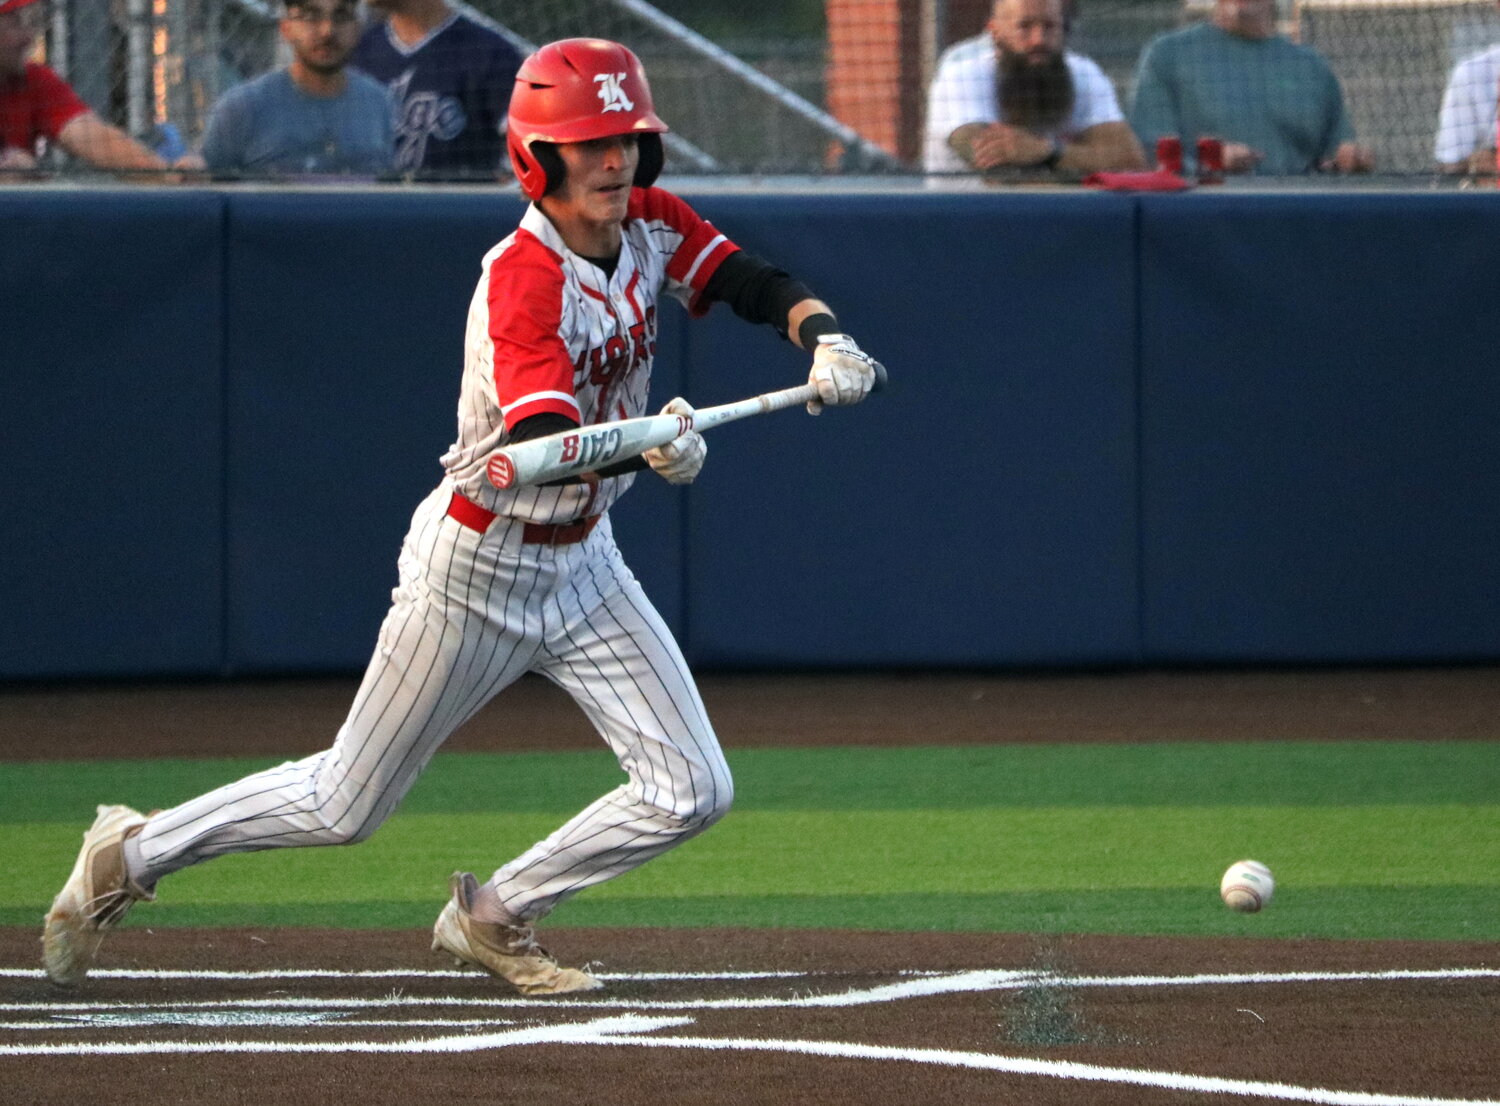 Josh Dunayczan bunts a run home during Thursday's Regional Quarterfinal game between Katy and Tompkins at Cy-Springs.